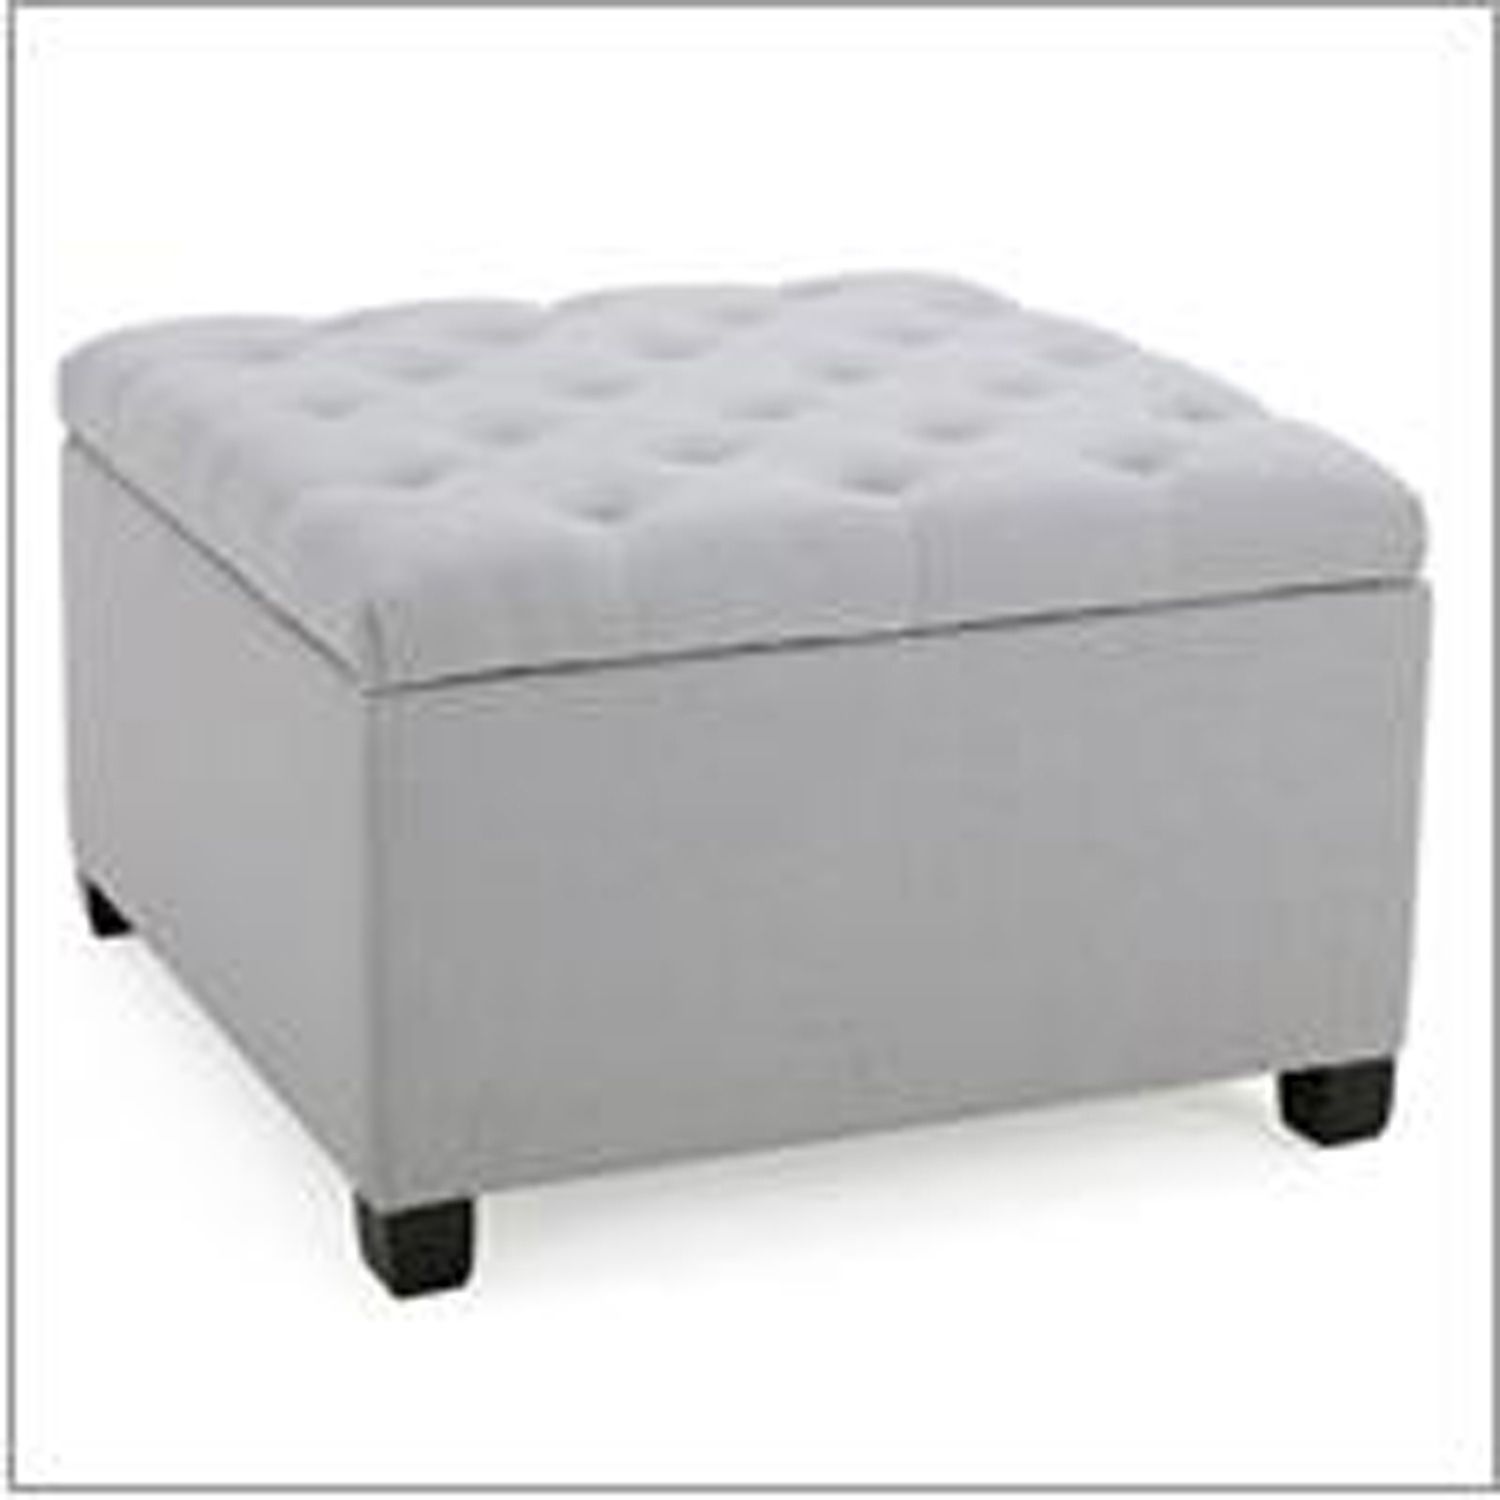 Famous Beige And Light Gray Fabric Pouf Ottomans Within Kendall Light Gray Fabric Storage Ottoman – Pier (View 6 of 10)